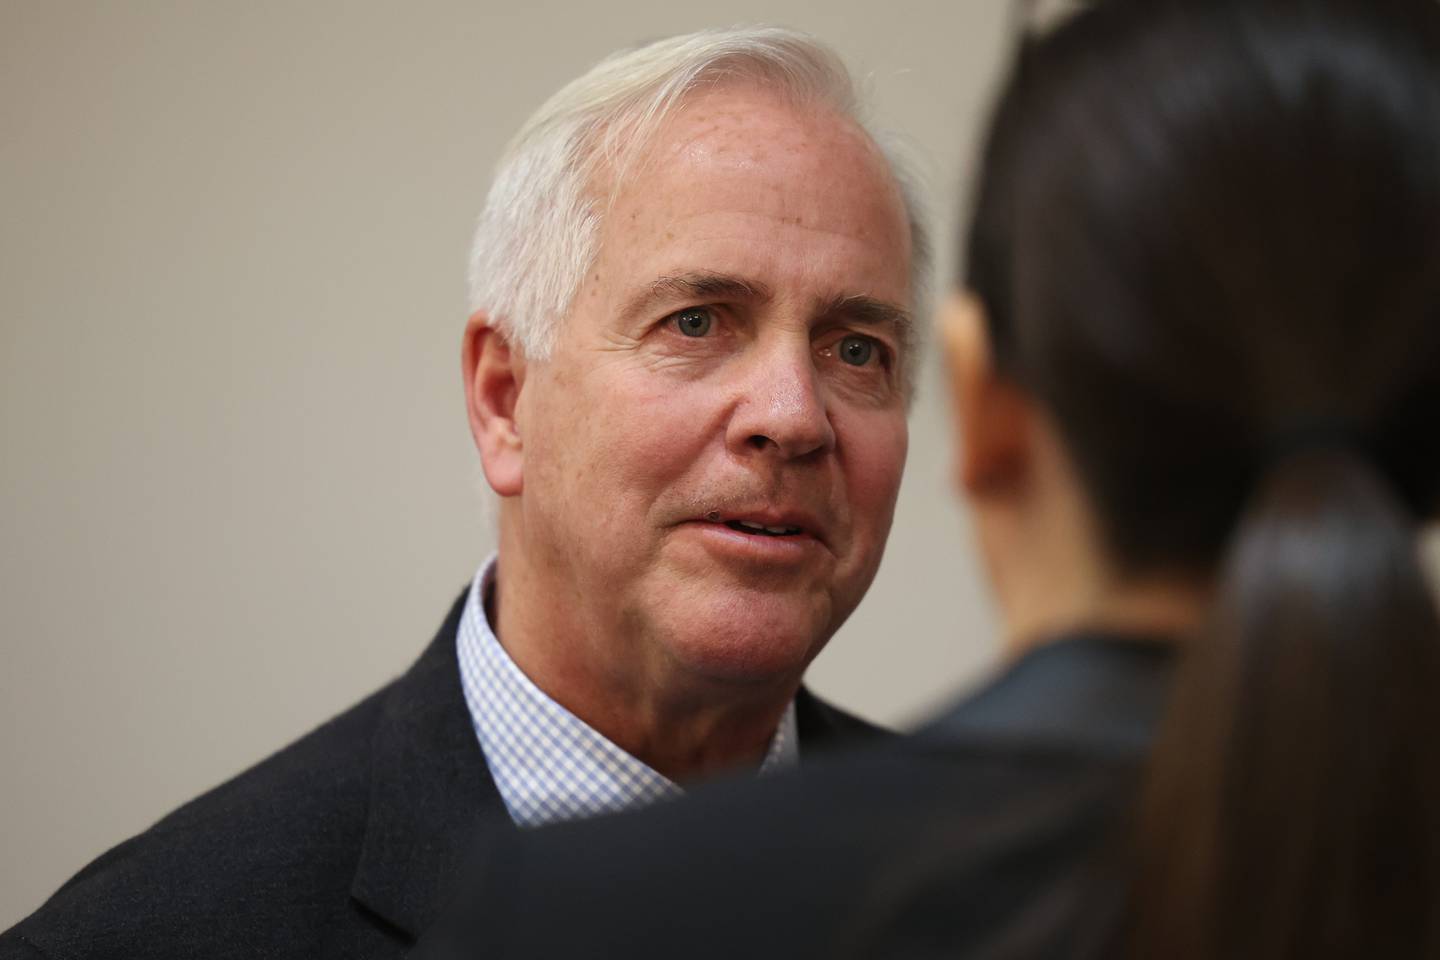 Mayor candidate Terry D’Arcy talks to a guest at the Joliet Mayoral Candidate Panel luncheon hosted by the Joliet Region Chamber of Commerce on Wednesday, March 8th, 2023 at the Clarion Hotel & Convention Center Joliet.